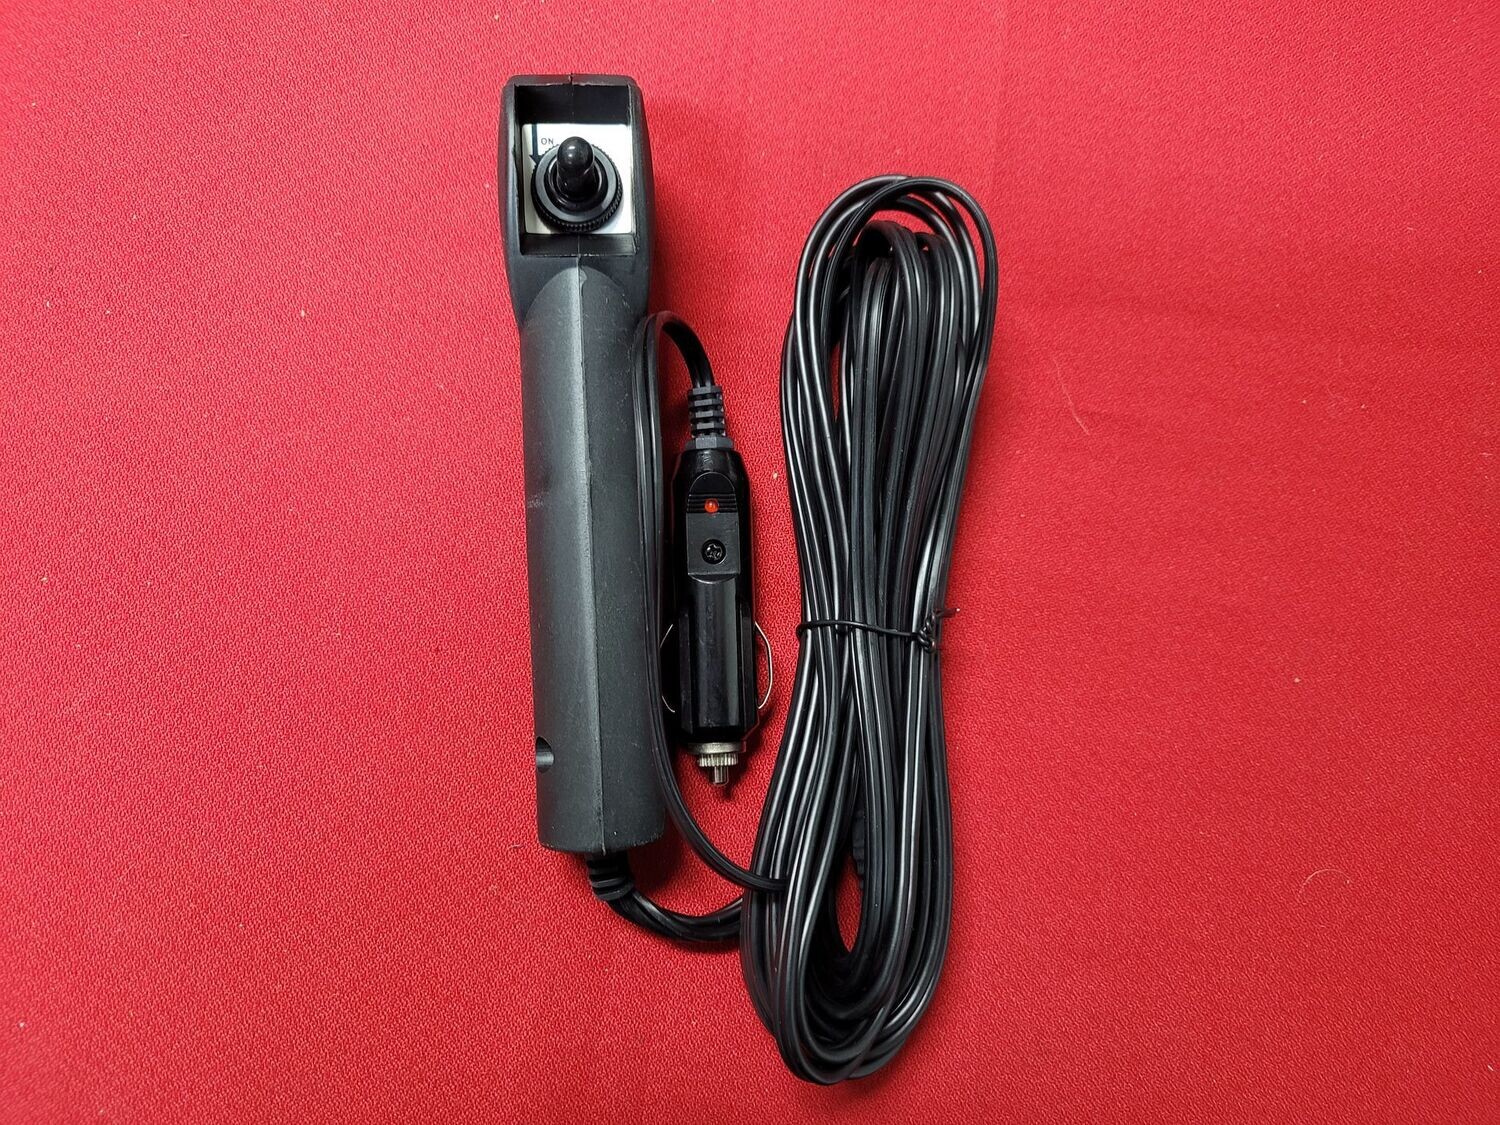 Remote Toggle Control Adapter (25’ Cable & Power/Cigarette Adapter)